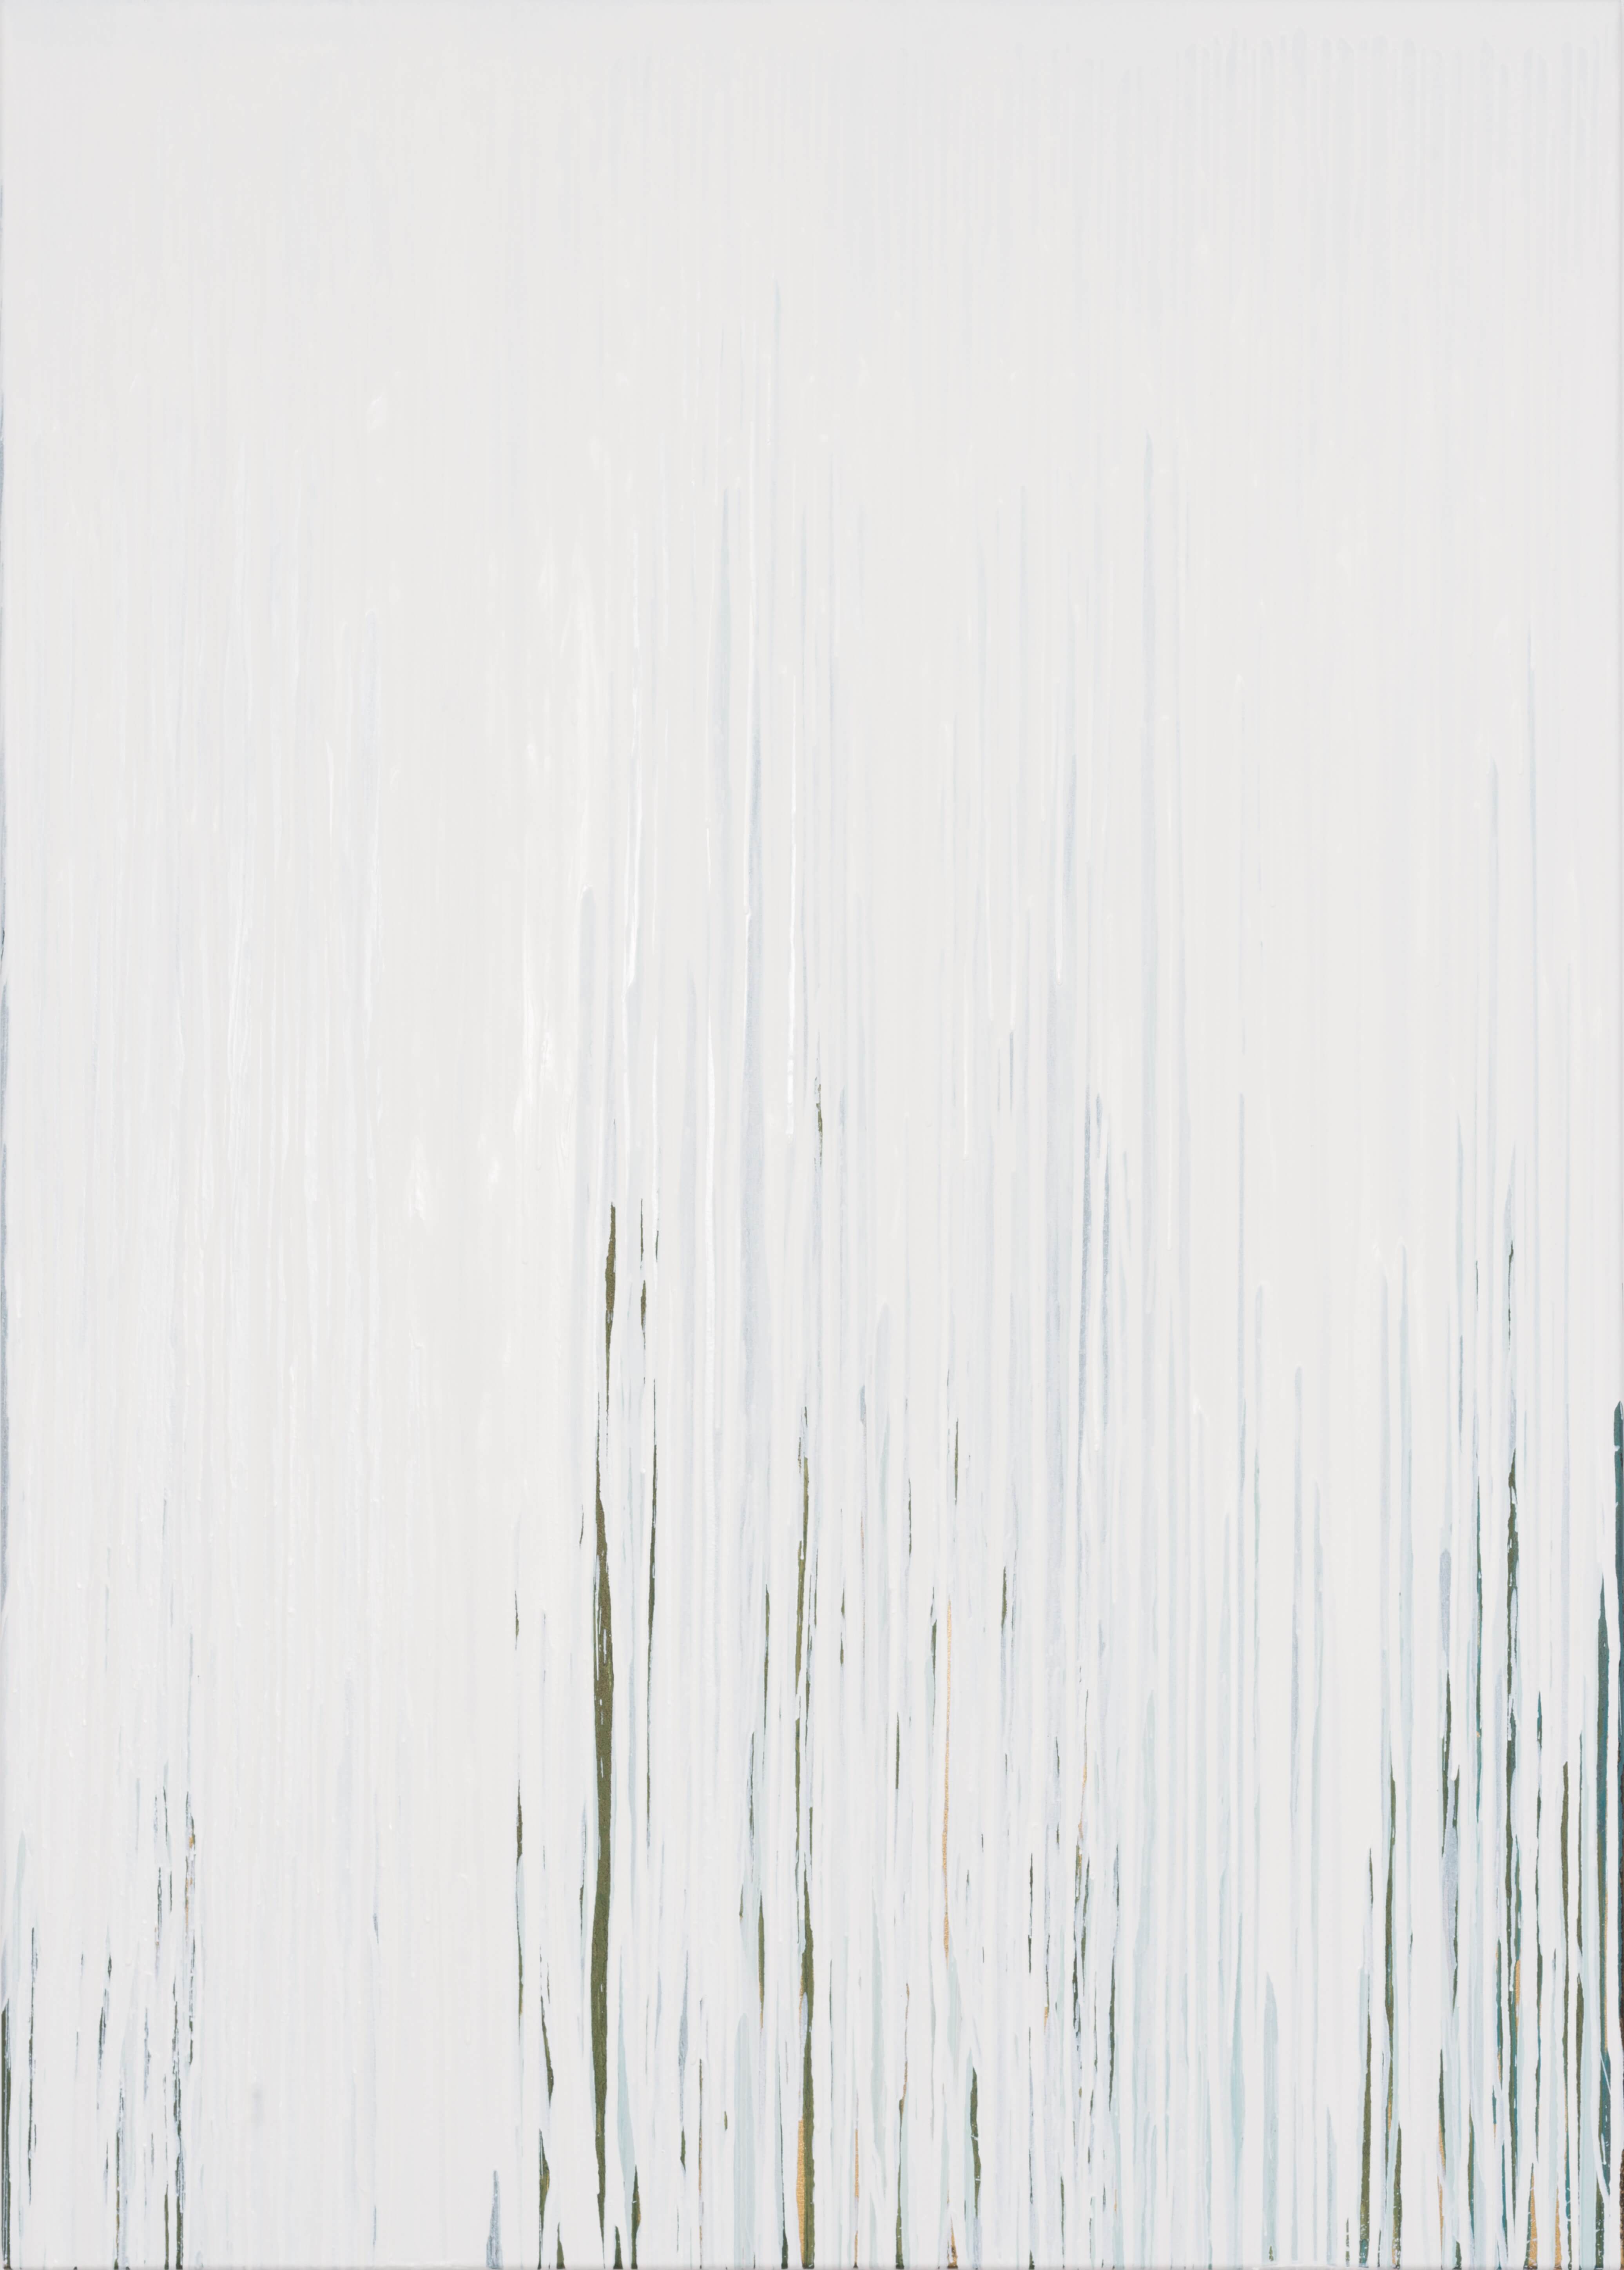 Joanna Borkowska Frequencies White 2014 oil and pigments on canvas 140 x 100 cm